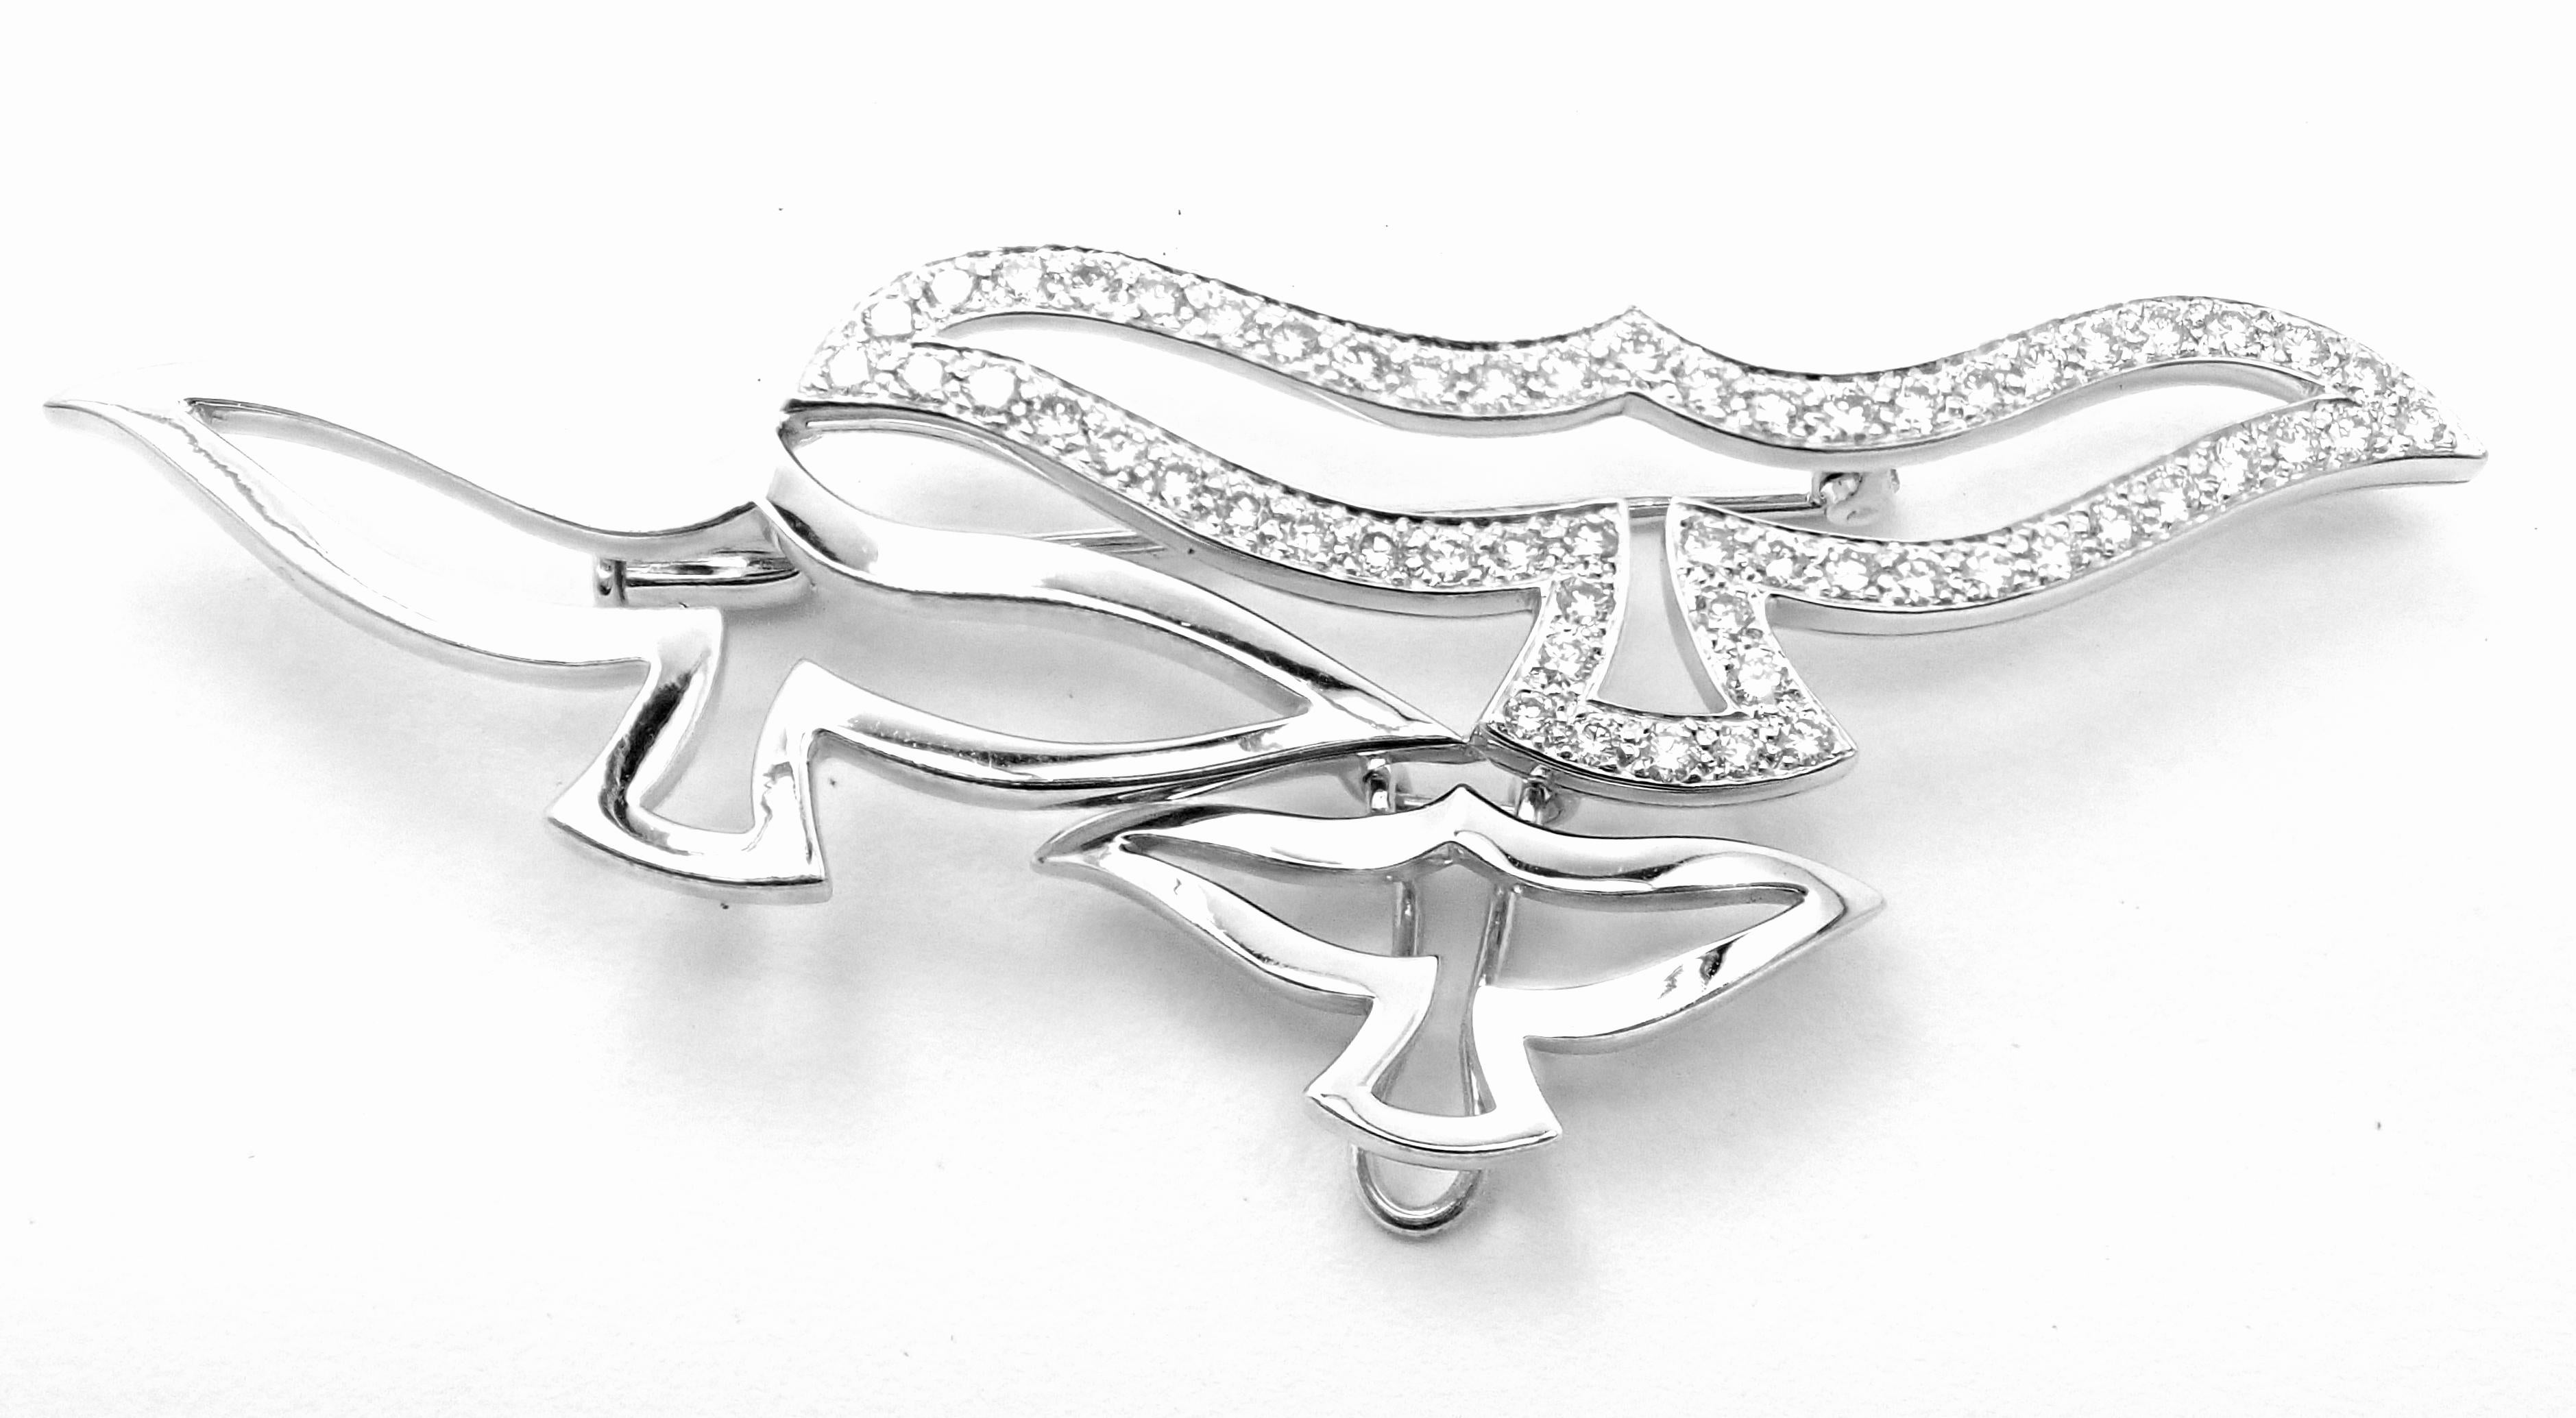 18k White Gold Diamond Bird Pin Brooch Pendant by Cartier. 
With 60 round brilliant cut diamonds VVS1 clarity, E color total weight approximately 2.50ct
Details:
Measurements: 2 3/4